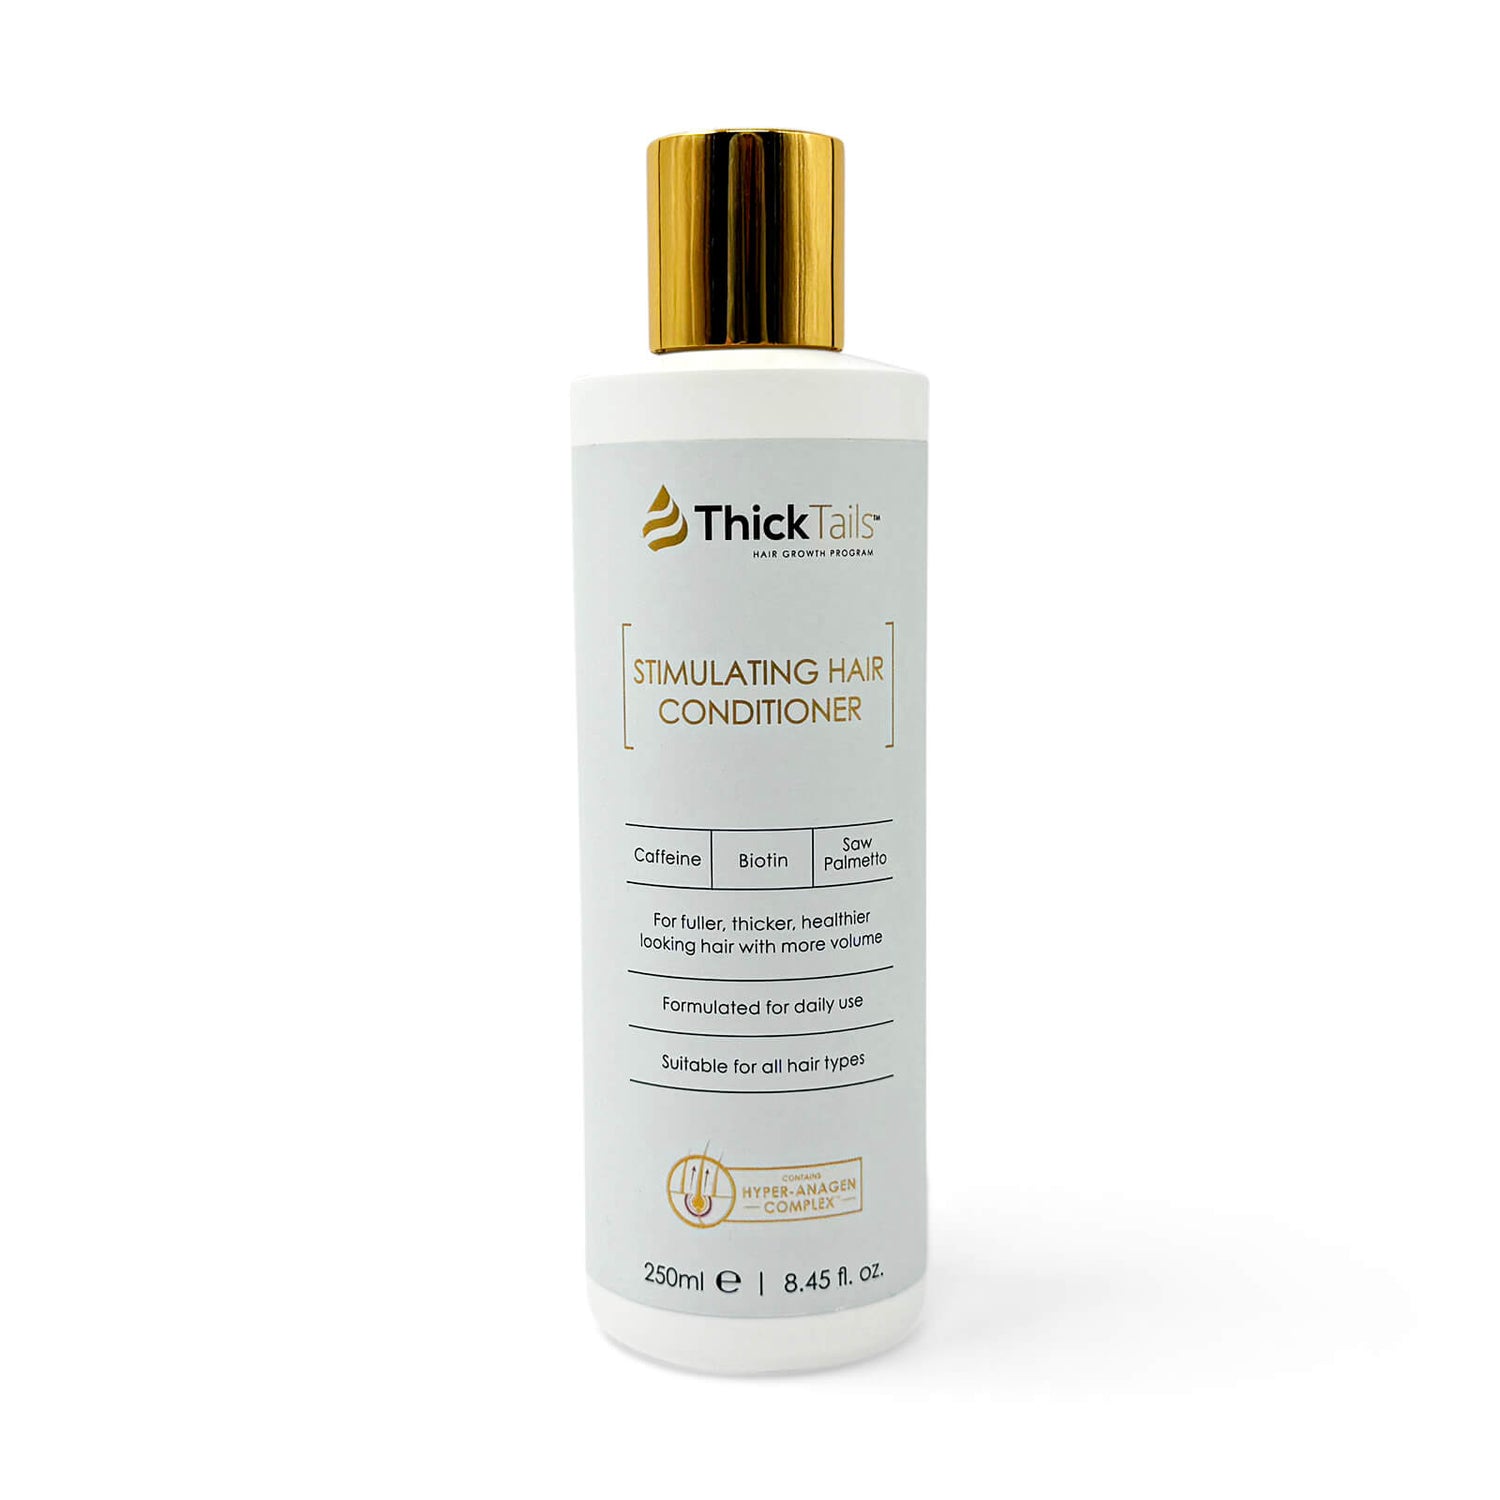 ThickTails Hair Treatment Products